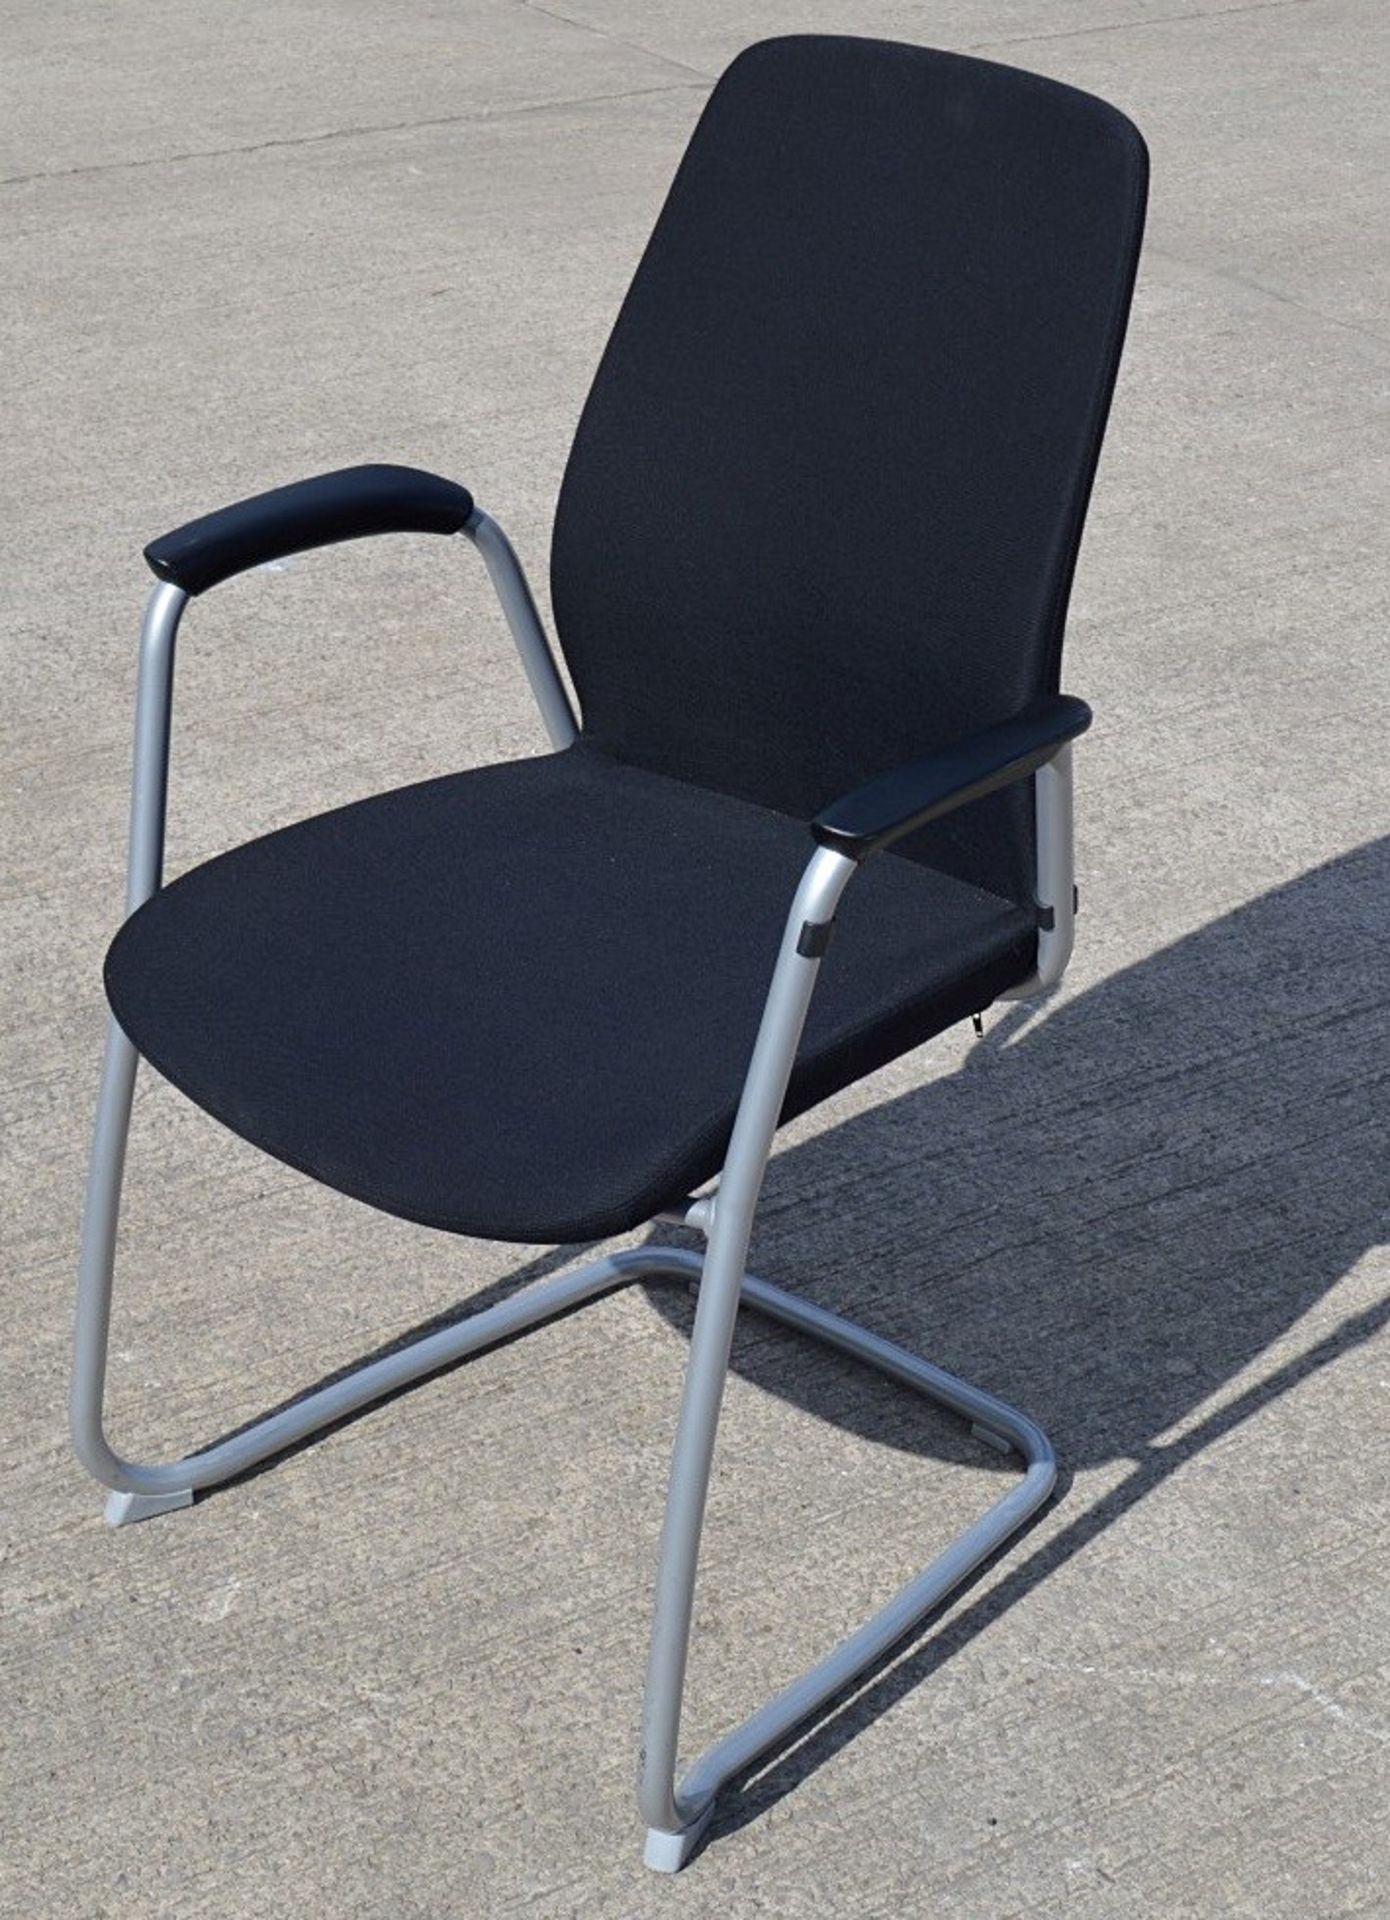 4 x Kinnarps 5000CV Meeting Chairs In Black - Dimensions: W59 x H92 x D53, Seat 45cm - Made In - Image 4 of 7